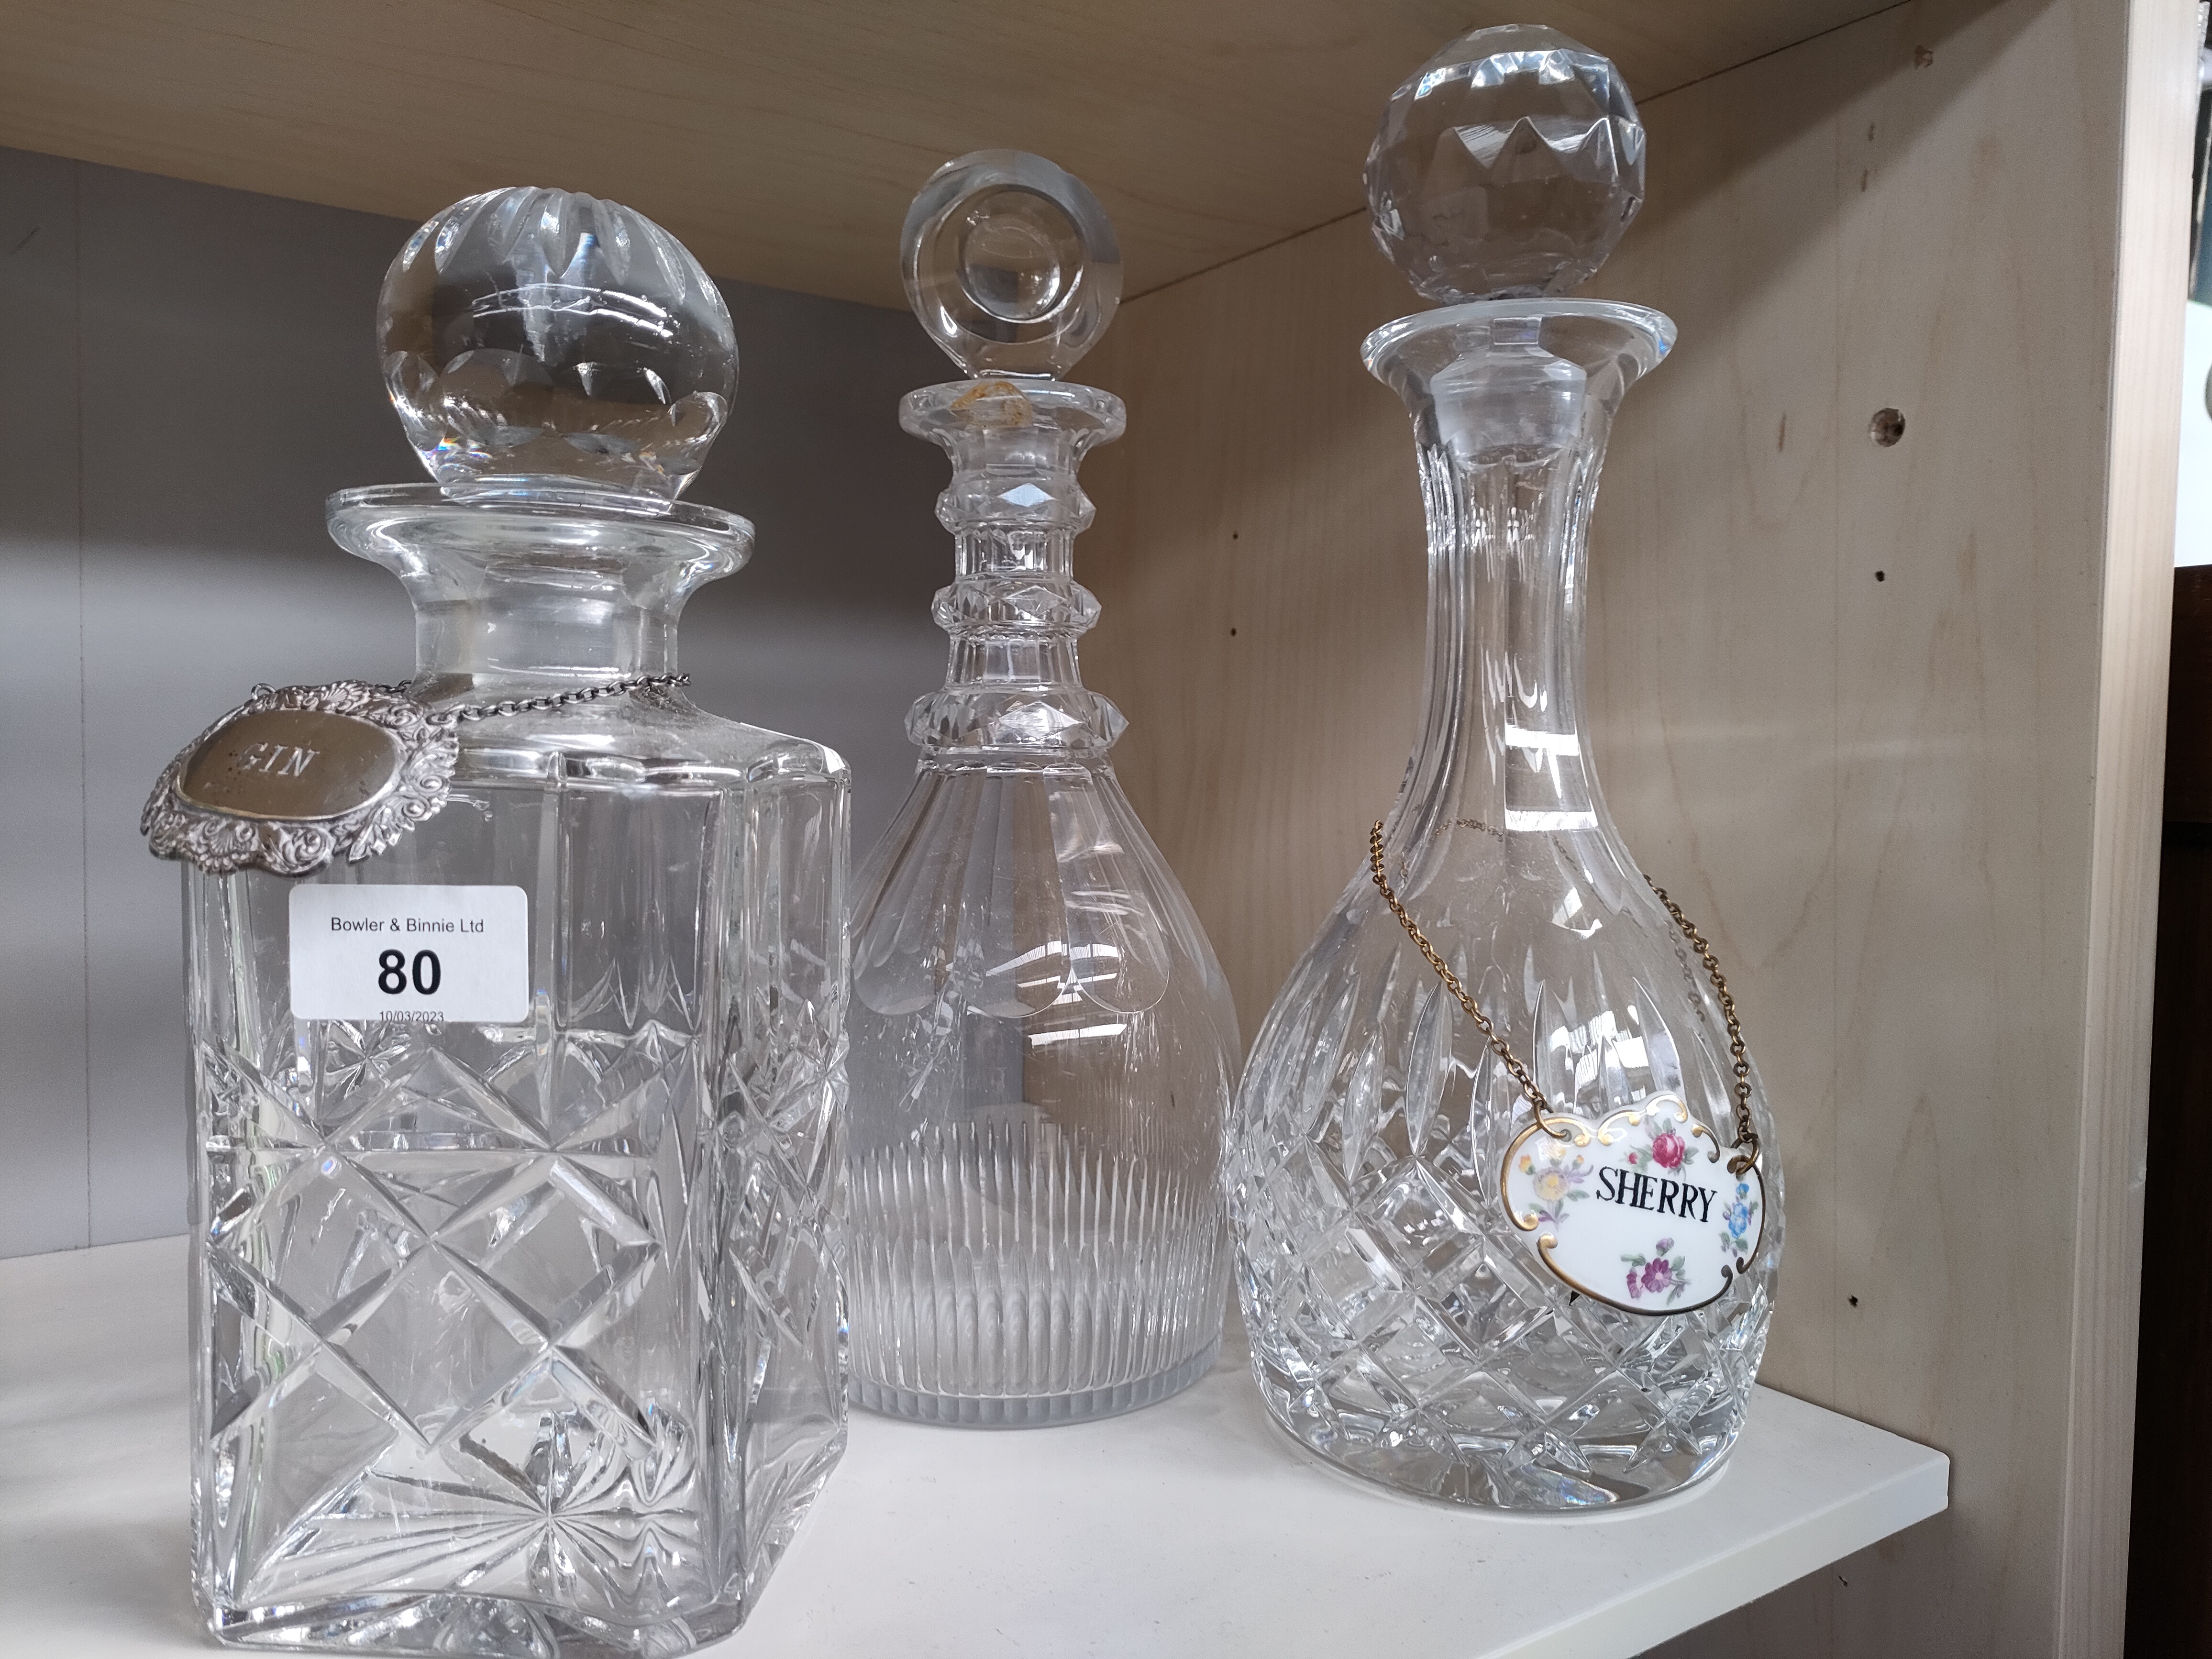 Lot of 3 Crystal decanters along with labels includes silver hall marked